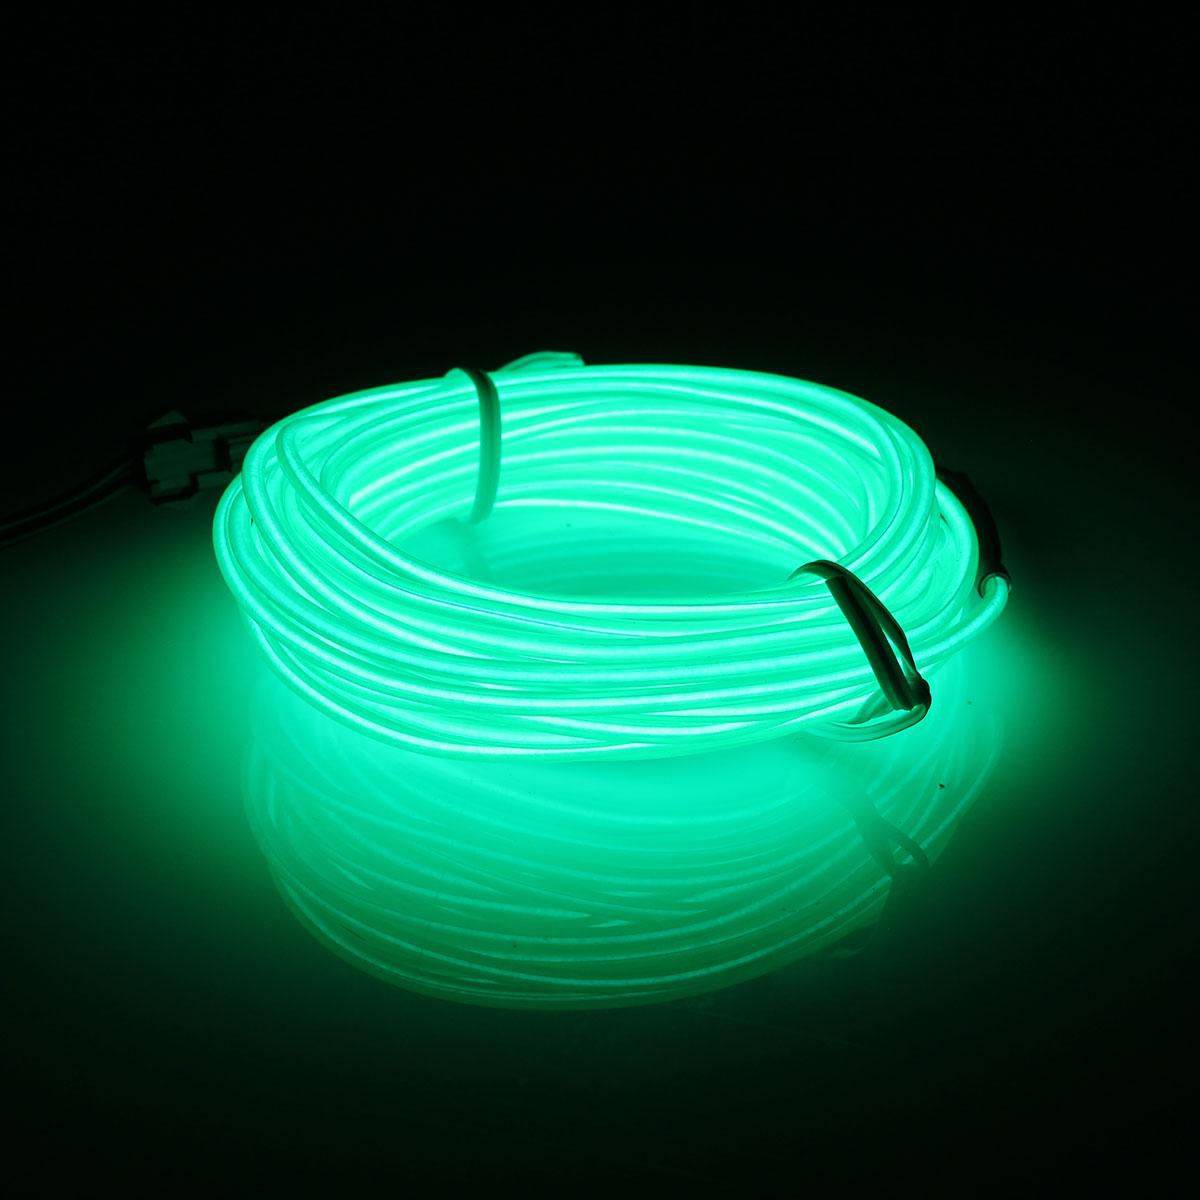 Neon Glow Cable Auto Car Accessories Car Electronics New Arrivals 8c52684db8f49511e9b444: 3 Blue Cables|3 Green Cables|3 Red Cables|3 Yellow Cables